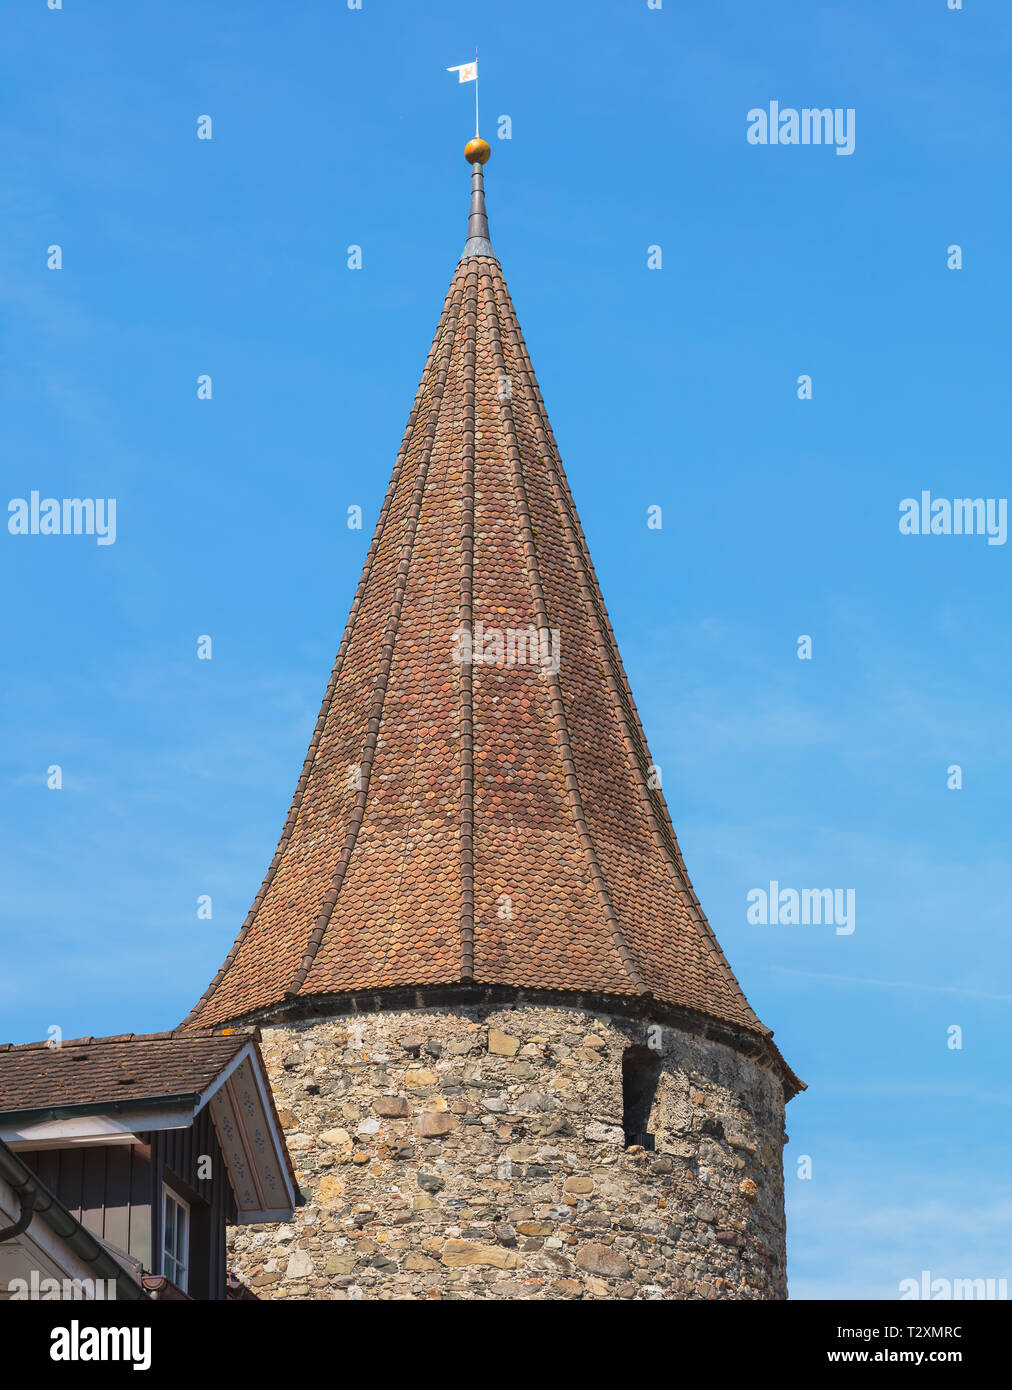 Upper part of a medieval tower in the historic part of the town of Bremgarten, Switzerland Stock Photo